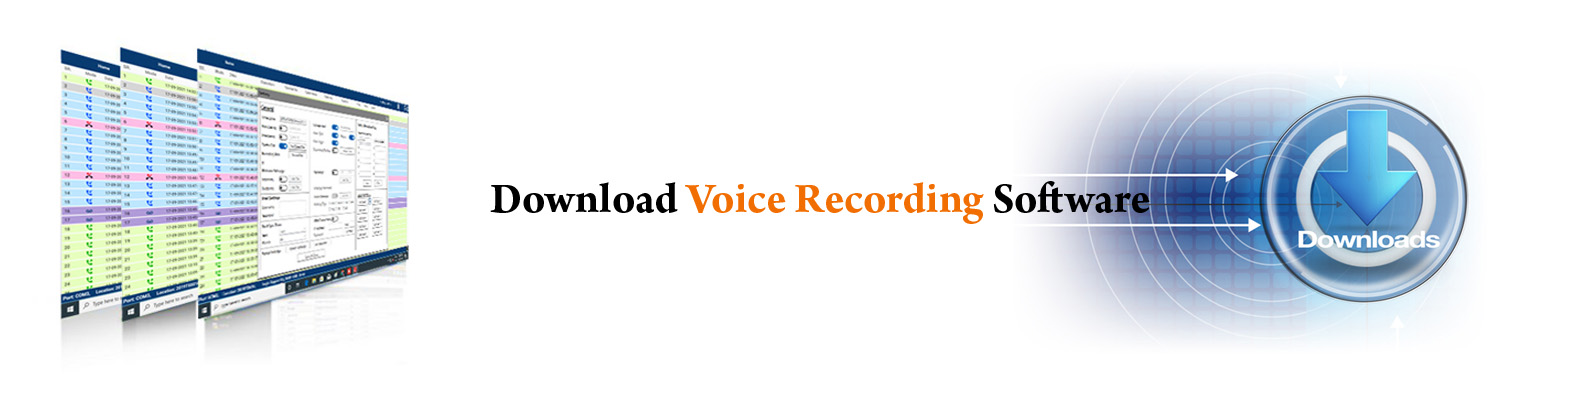 download voice recording software